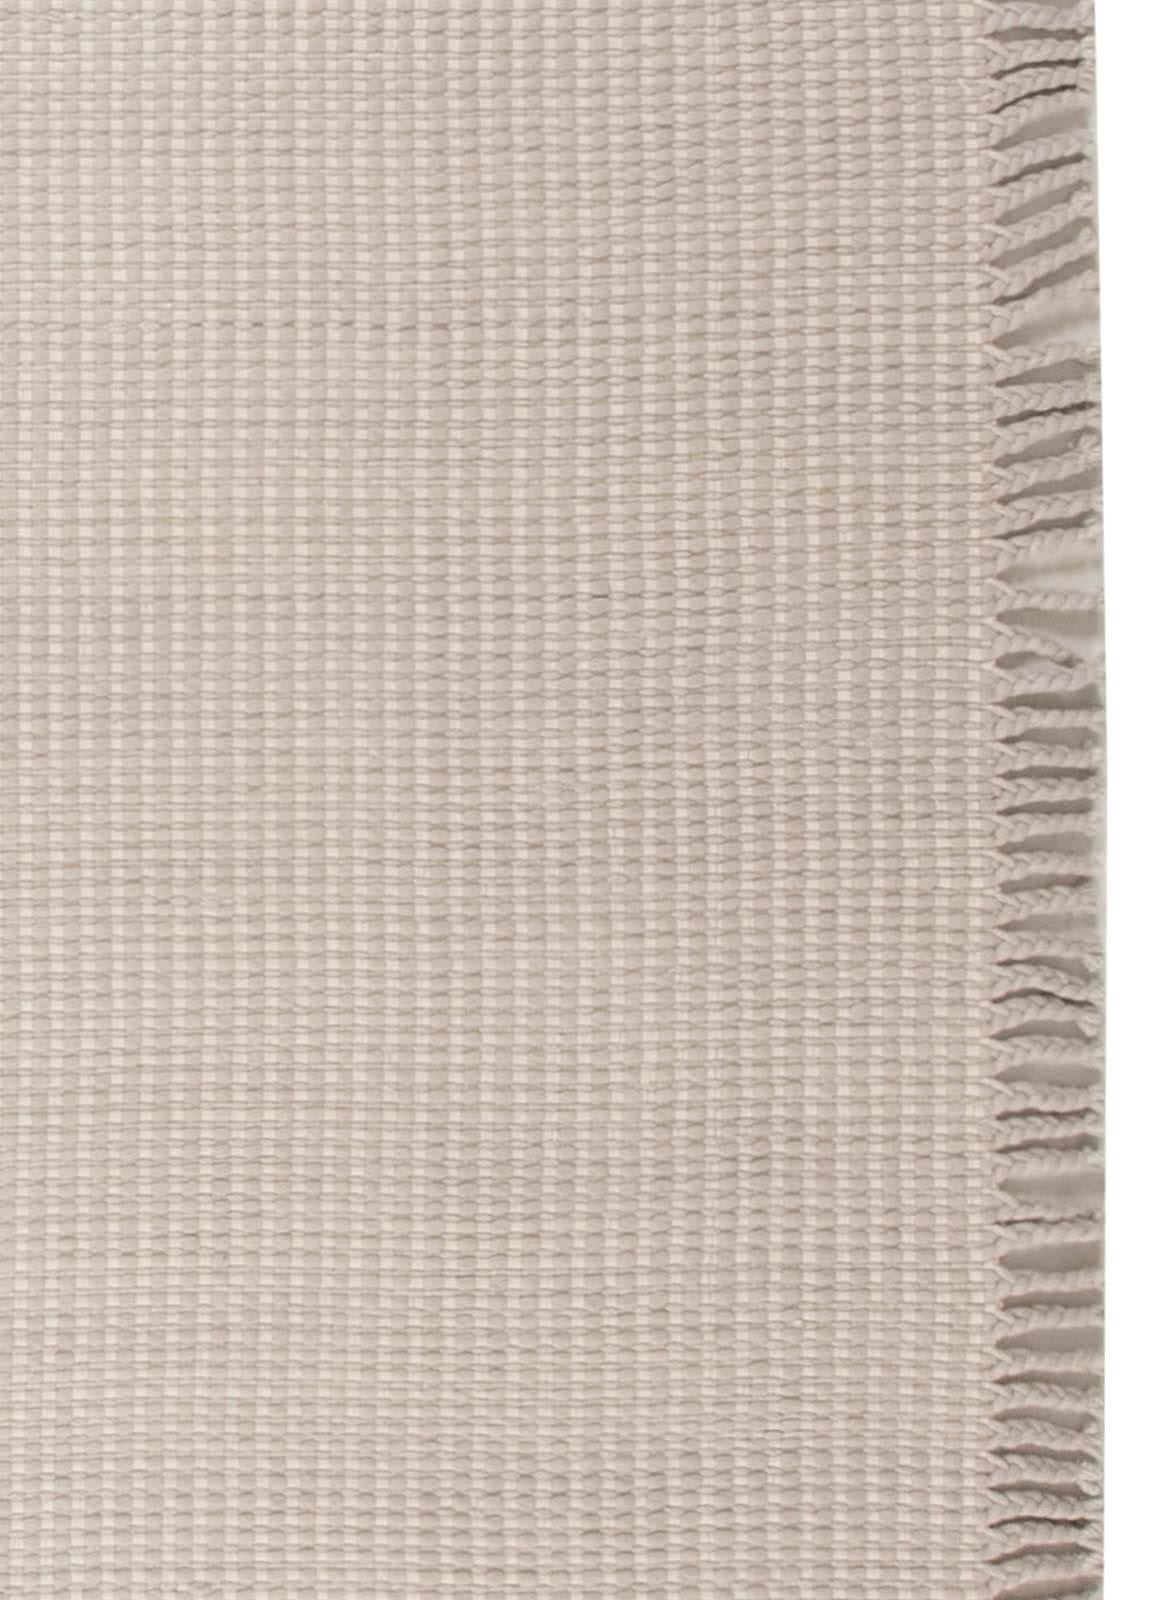 High-Quality Modern Beige, Gray Flat-Weave Wool Rug by Doris Leslie Blau In New Condition For Sale In New York, NY